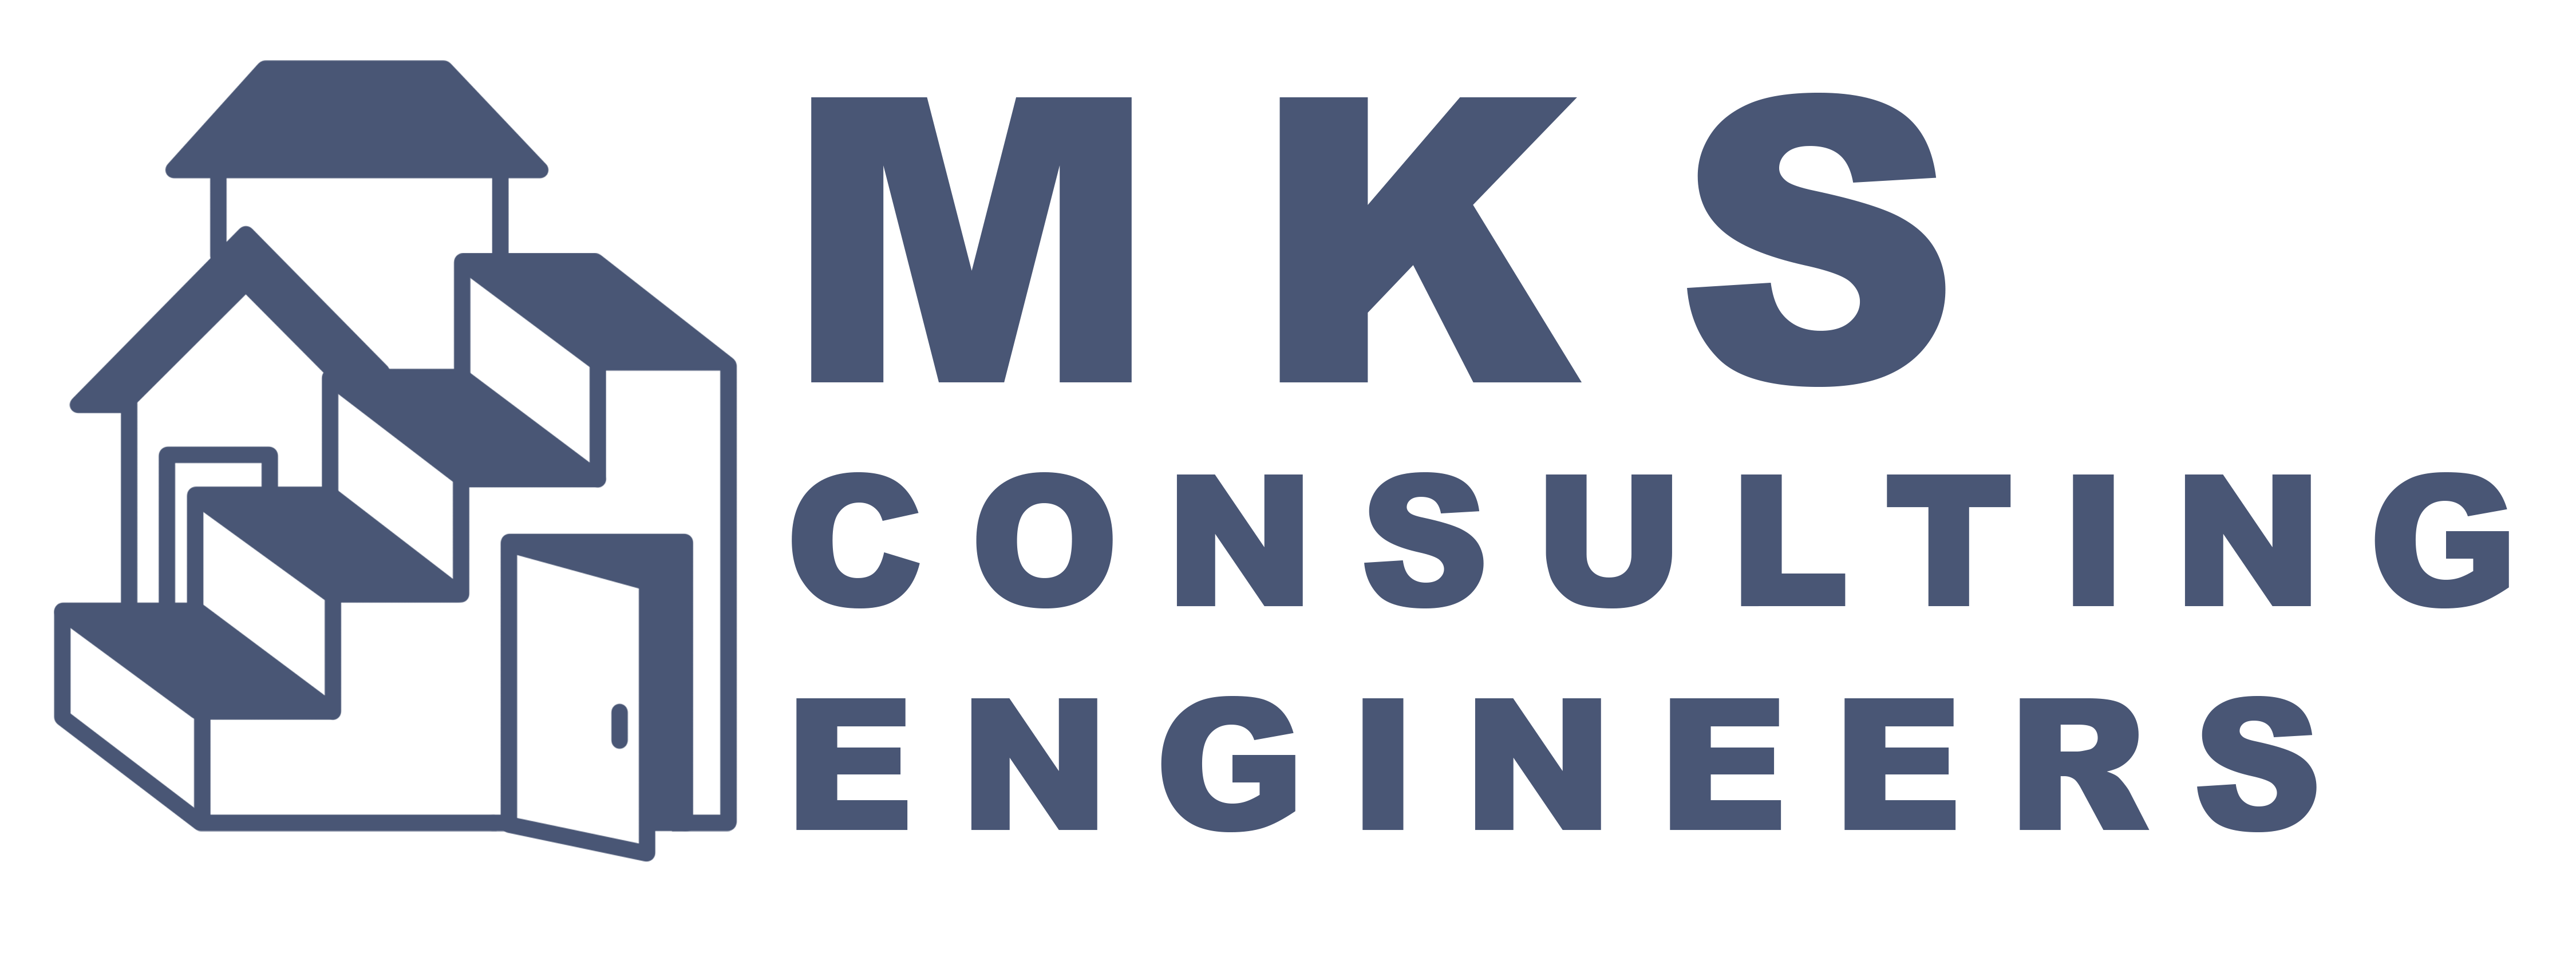 MKS Consulting Engineers